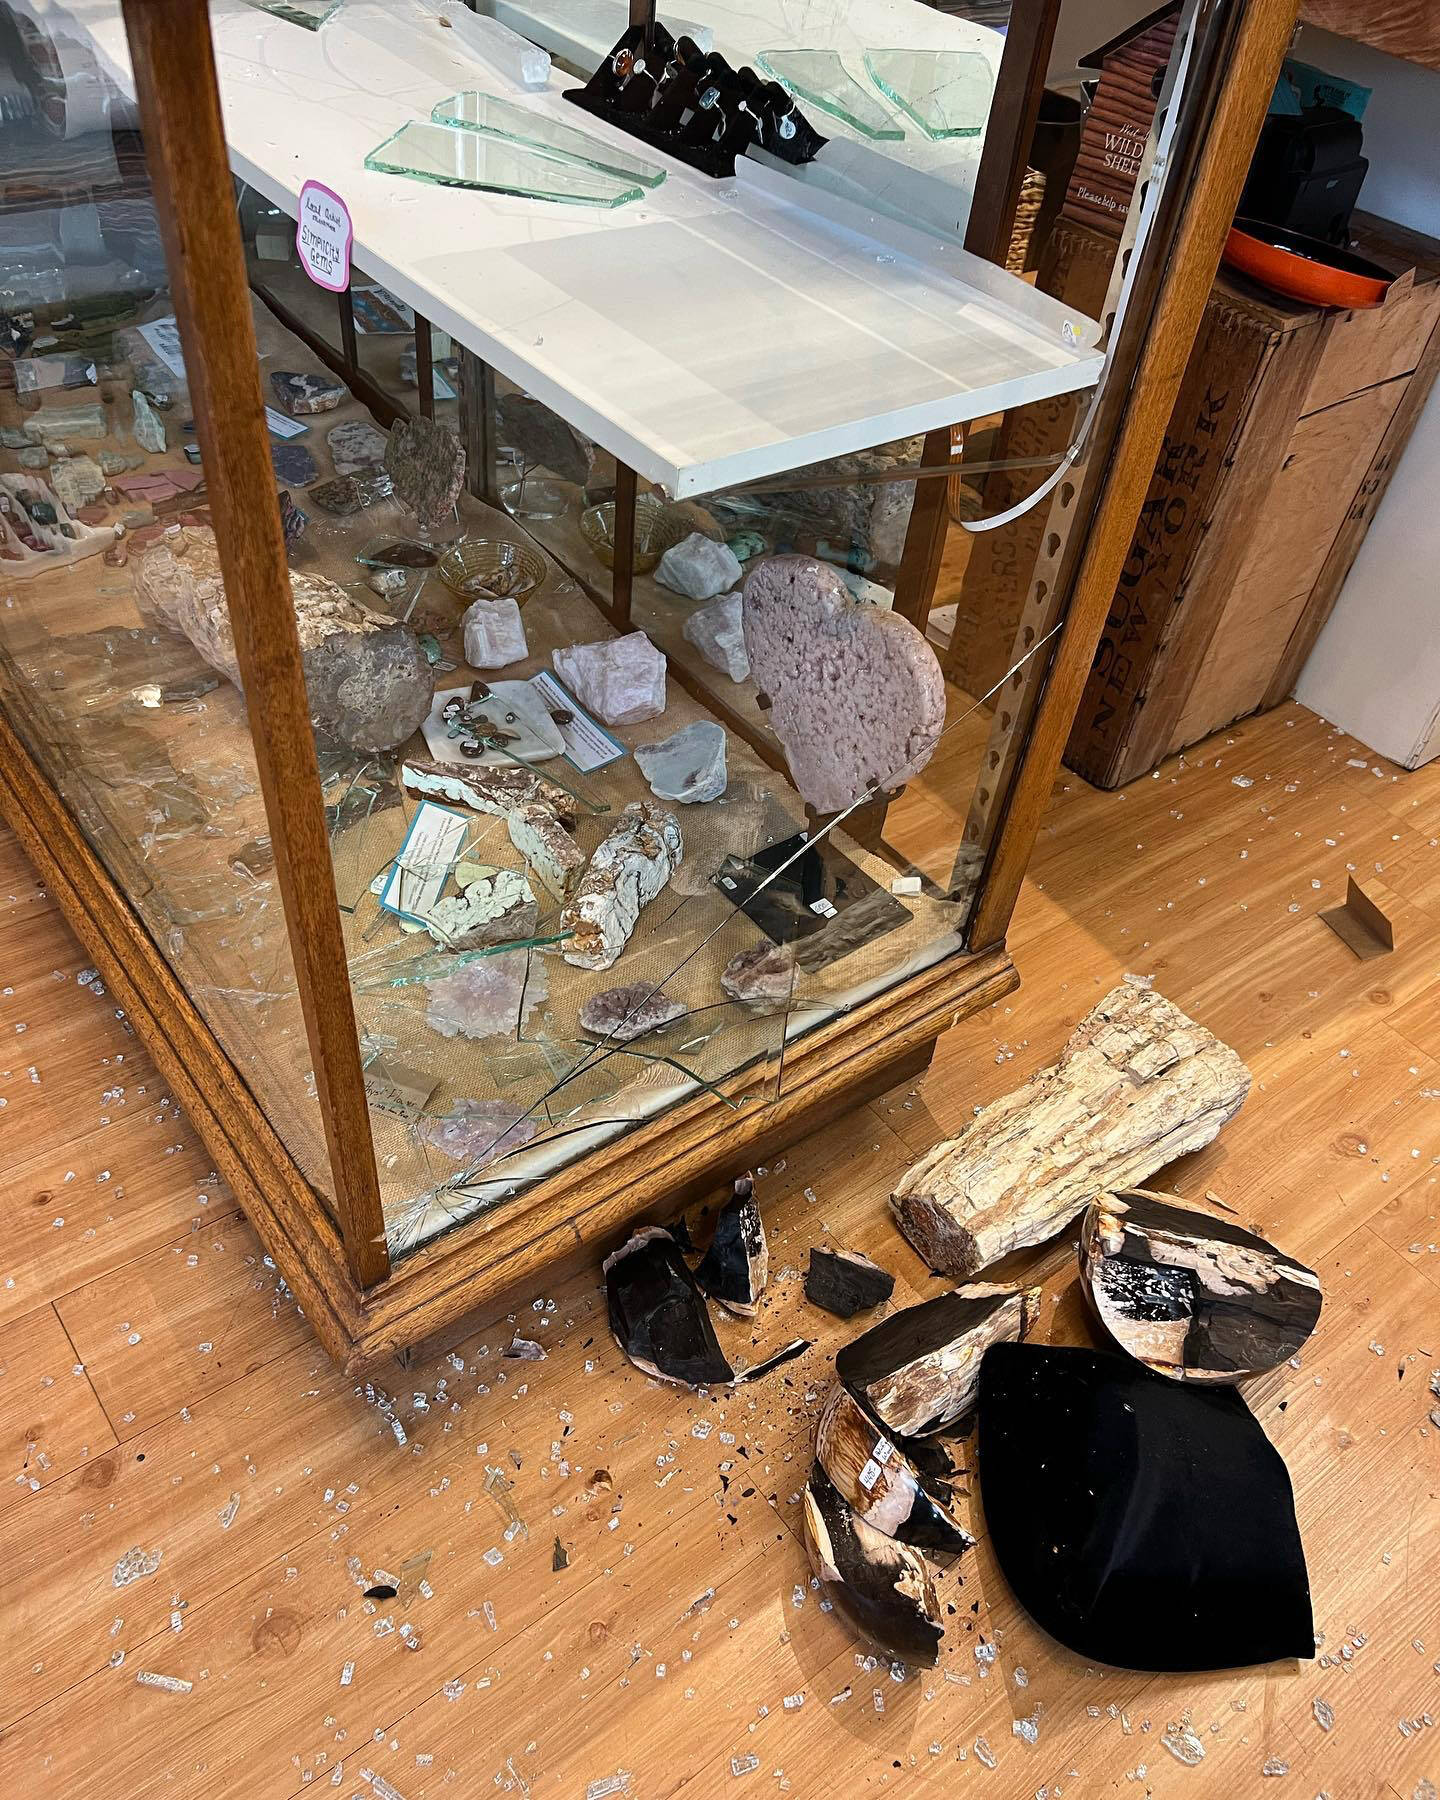 The glass display case was broken to remove jewelry.